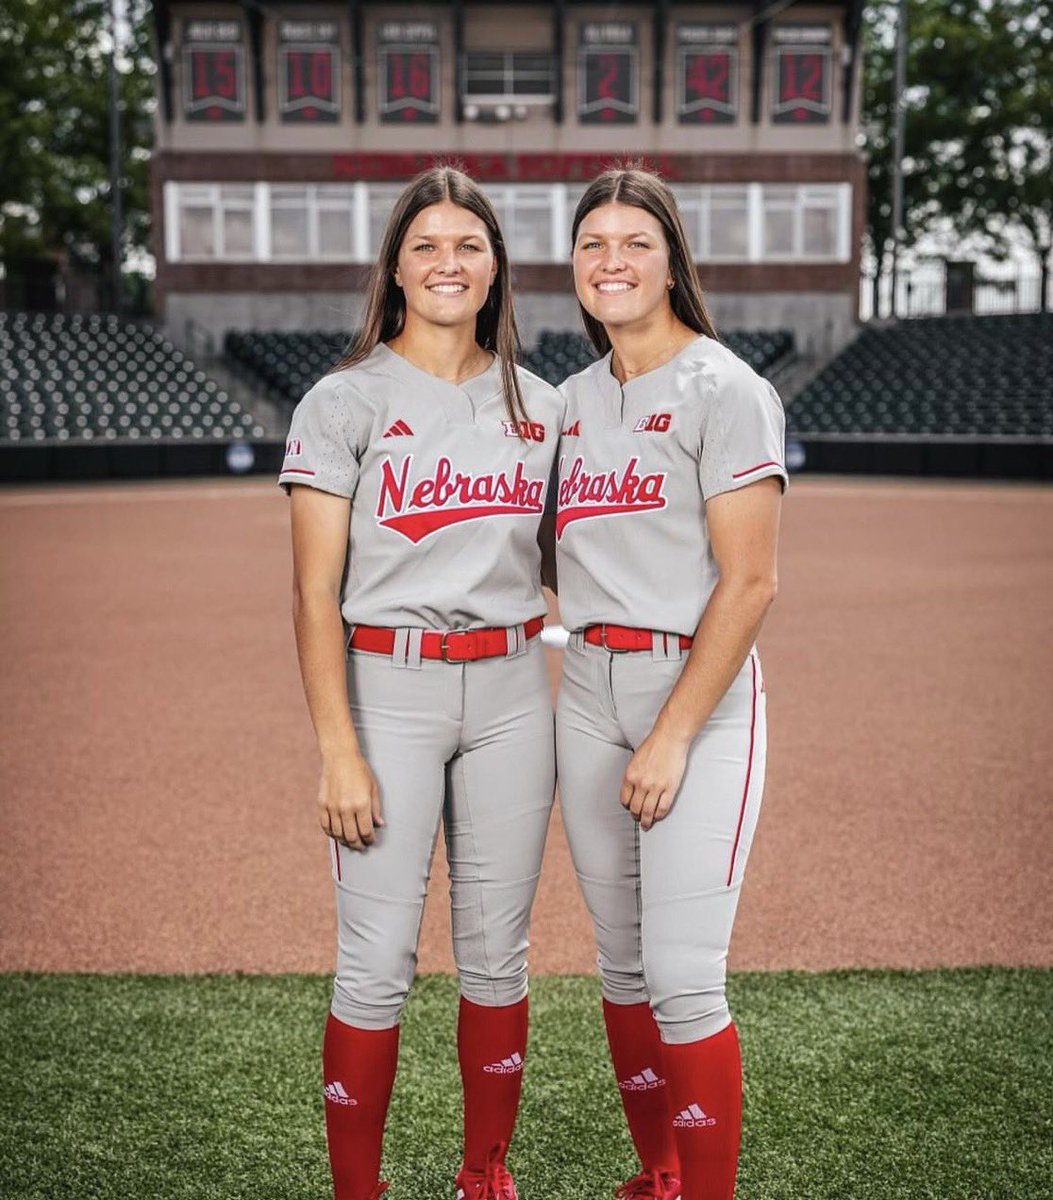 The Camenzind twins have been coming to camps, watching games and sharing special moments with our program for a long time. Now, it is with a grateful heart that we welcome Lauren, Hannah & family to THE RED TEAM❤️❤️